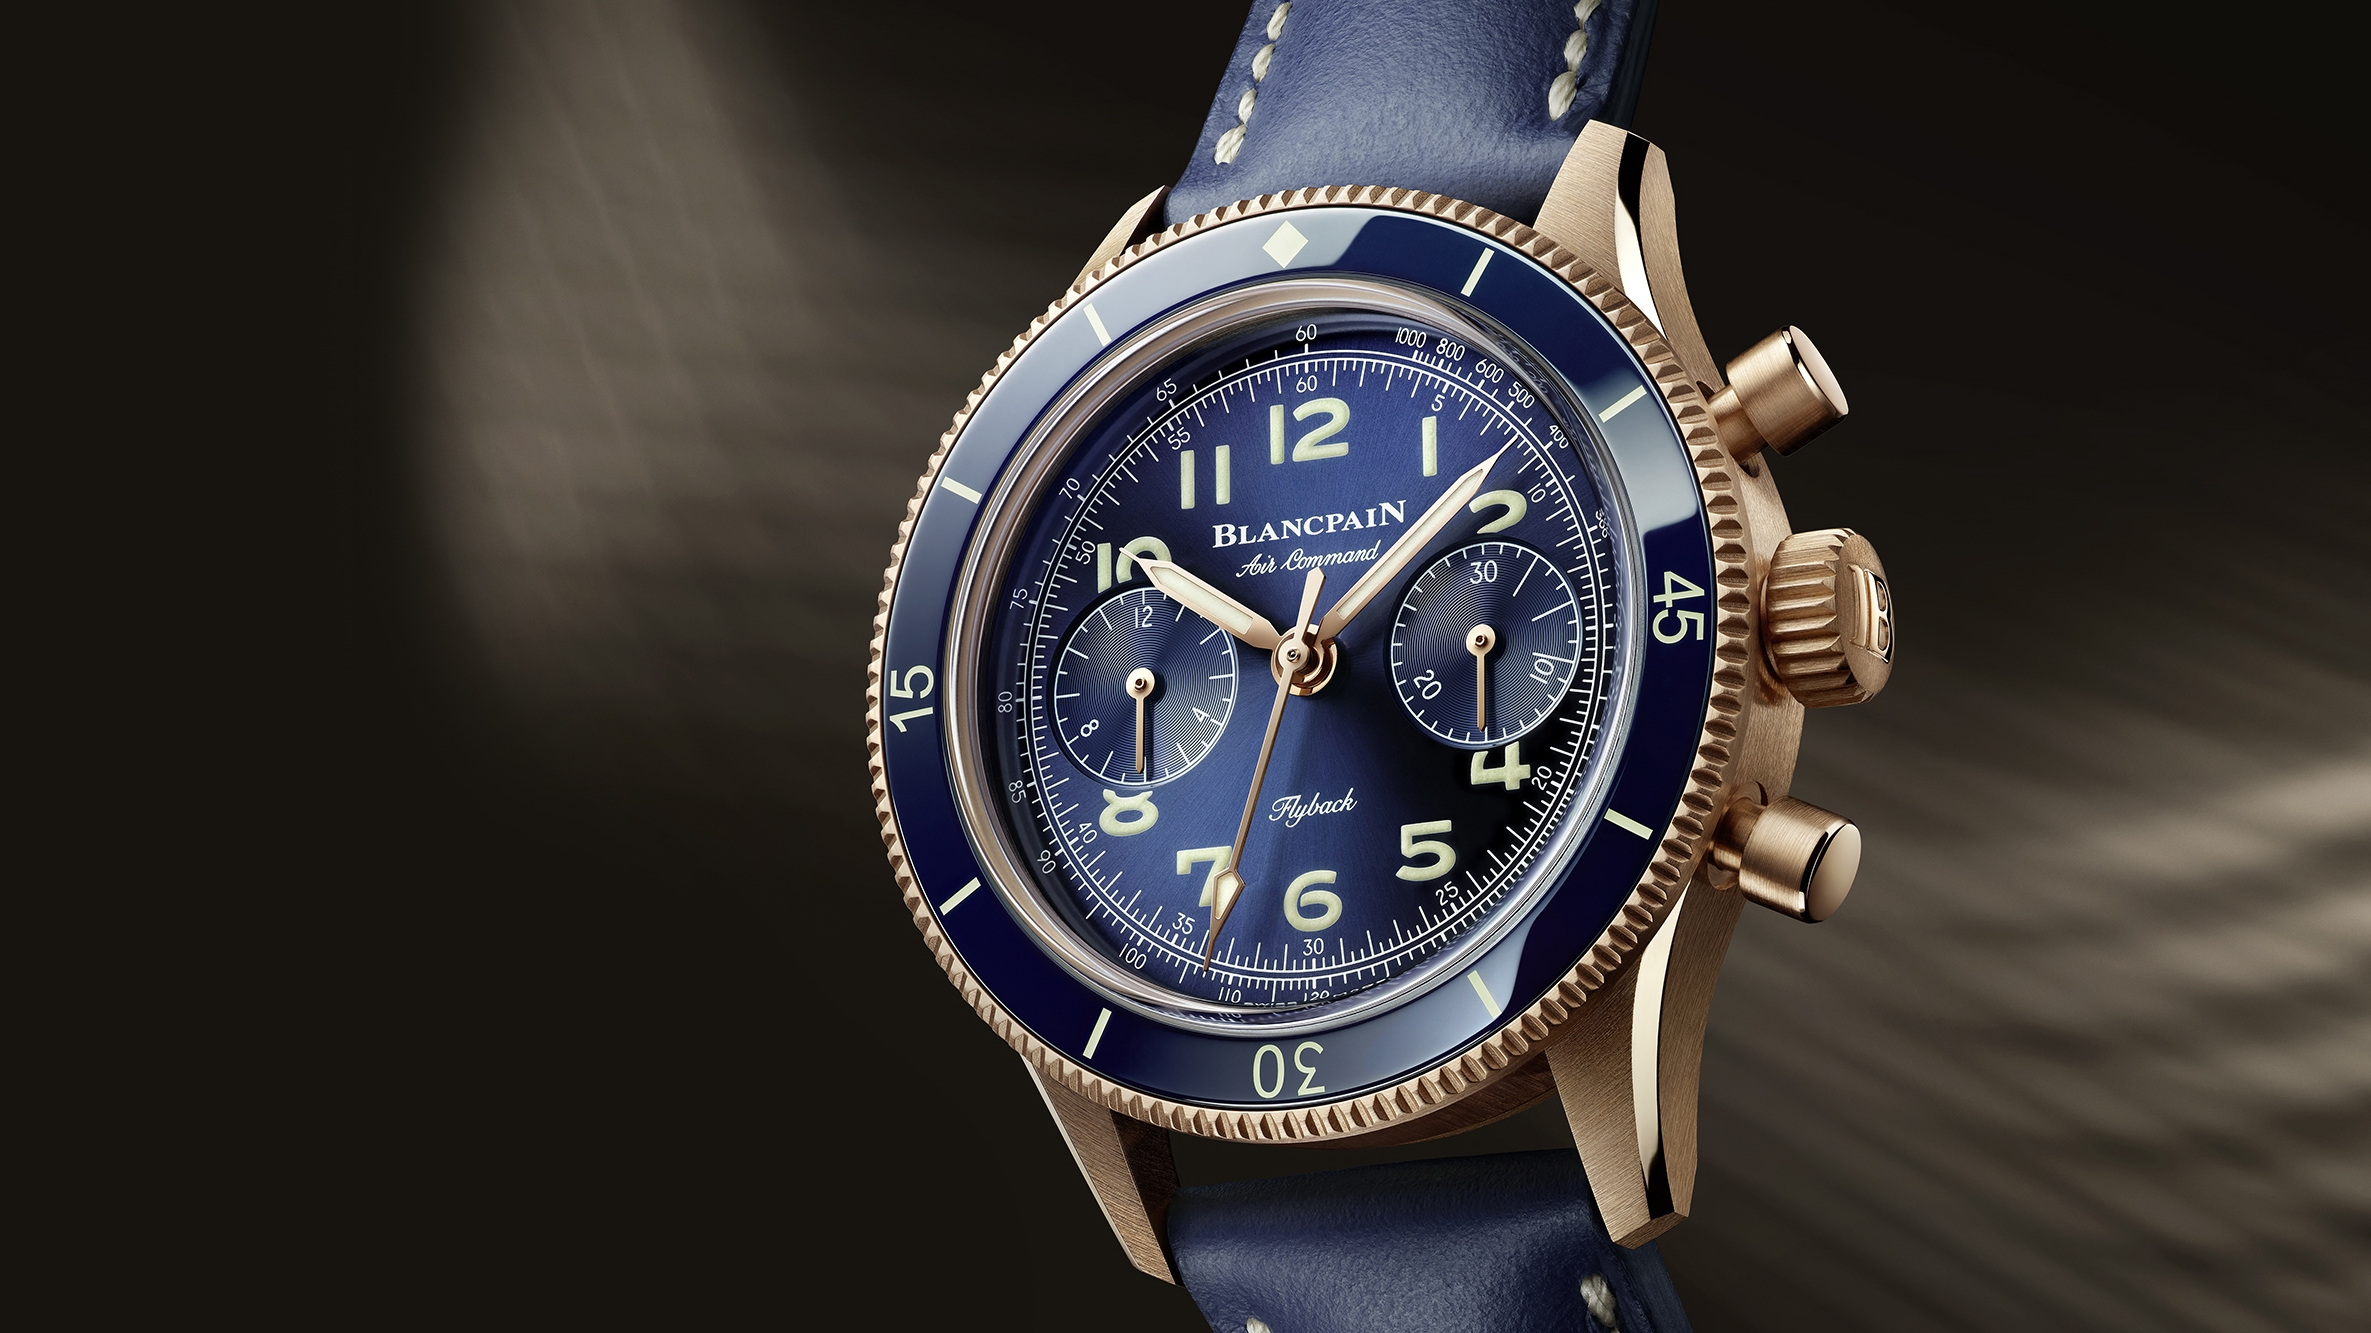 Blancpain - Air Command Chronograph-Flyback